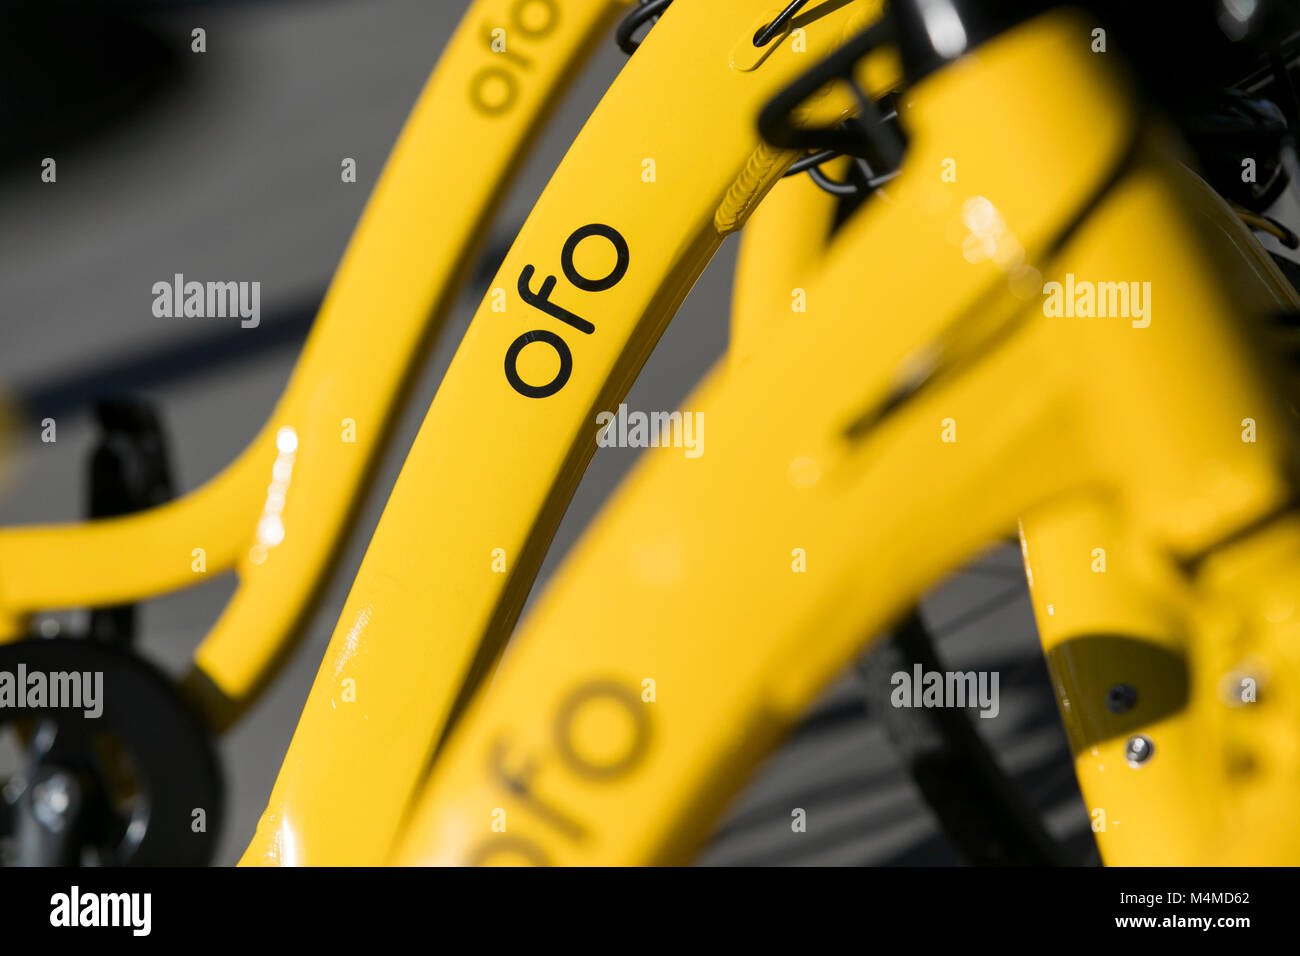 A row of Ofo dock-less bicycle-sharing bikes in Tempe, Arizona, on February 3, 2018. Stock Photo